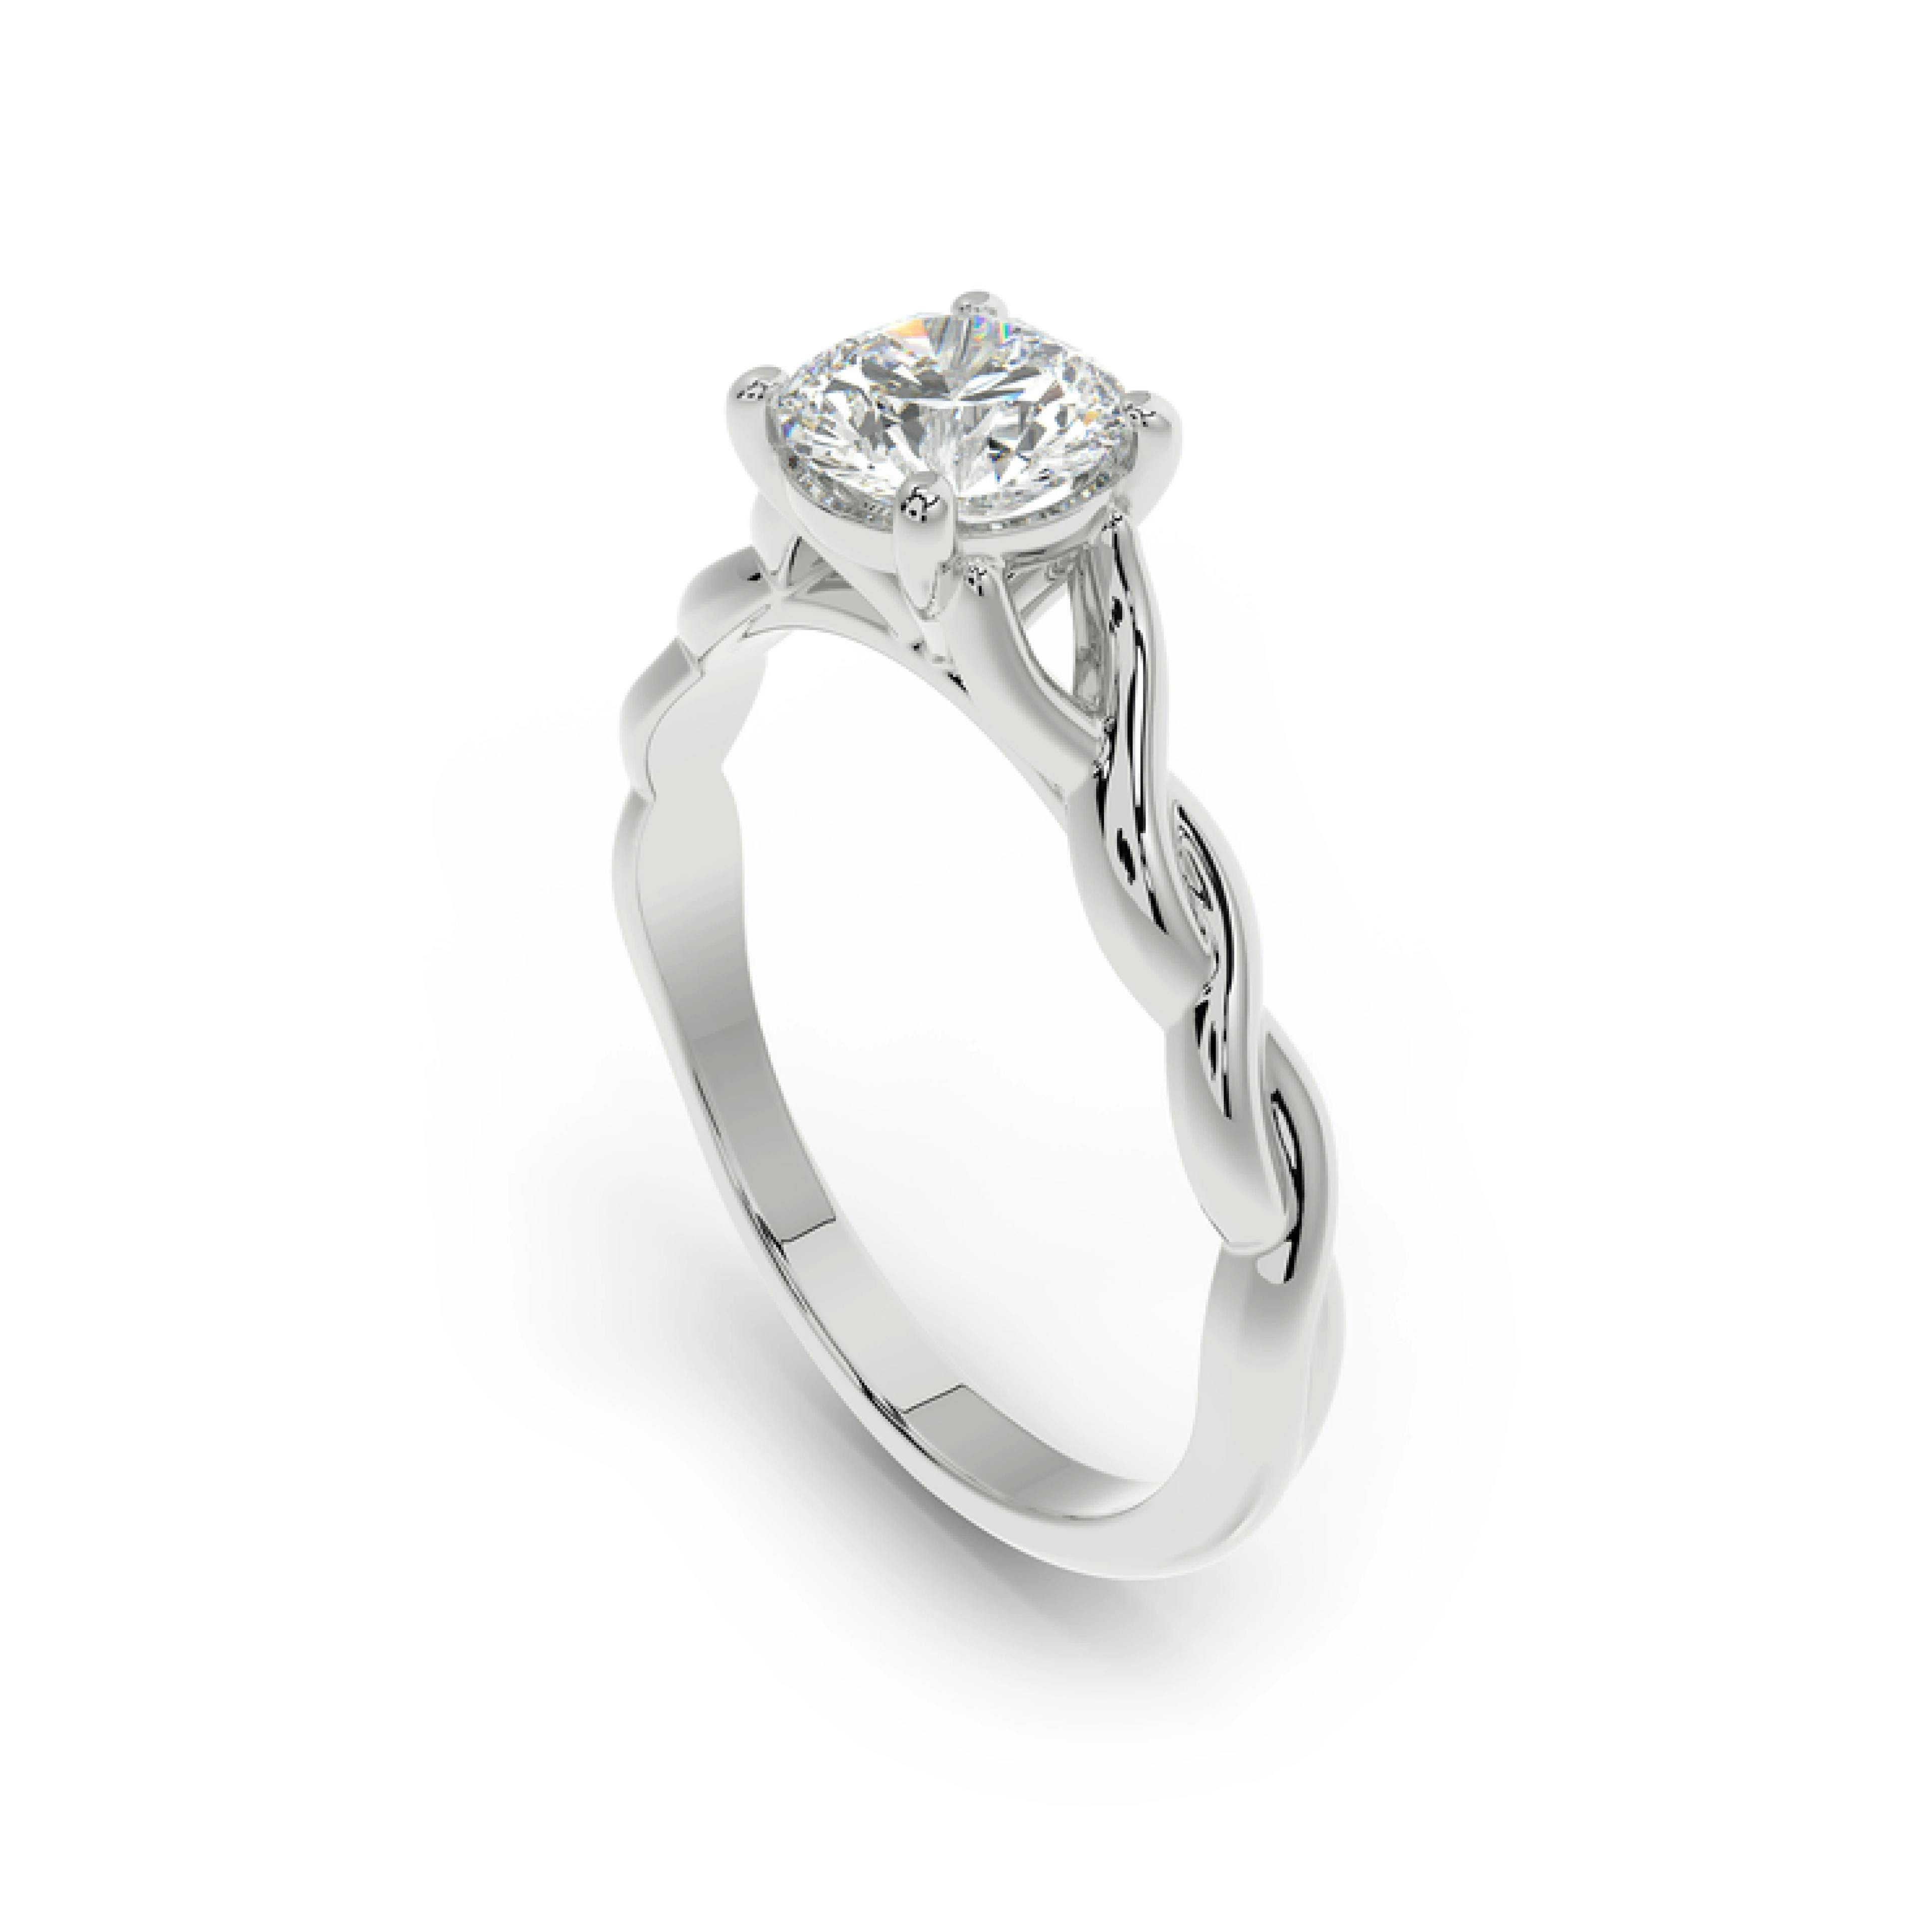 Rendered image of a diamond solitaire ring with a half twisted band in White Gold